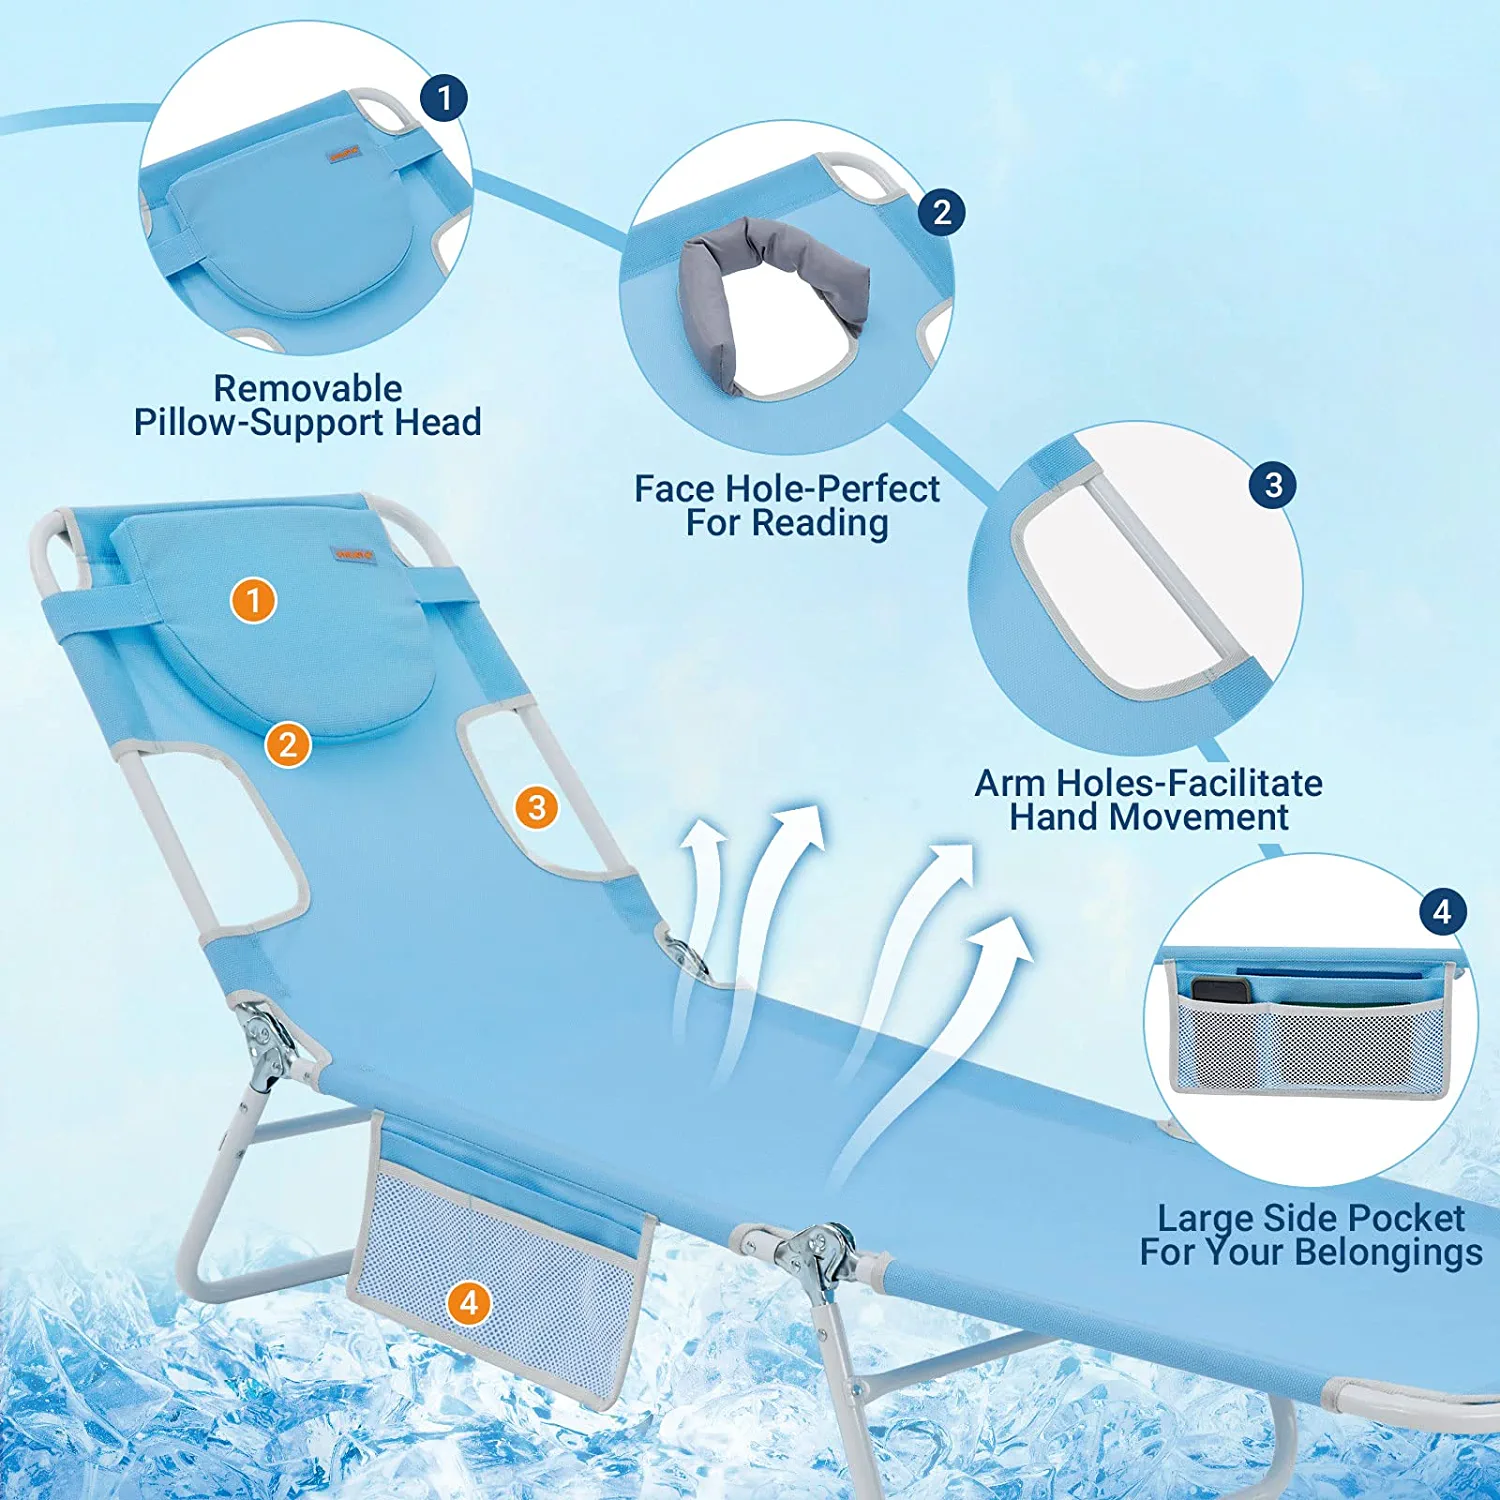 #WEJOY Face Down Tanning Chair, Beach Lounge Chairs, Portable Lightweight Reclining Chair for Adult(Blue) - image 3 of 5